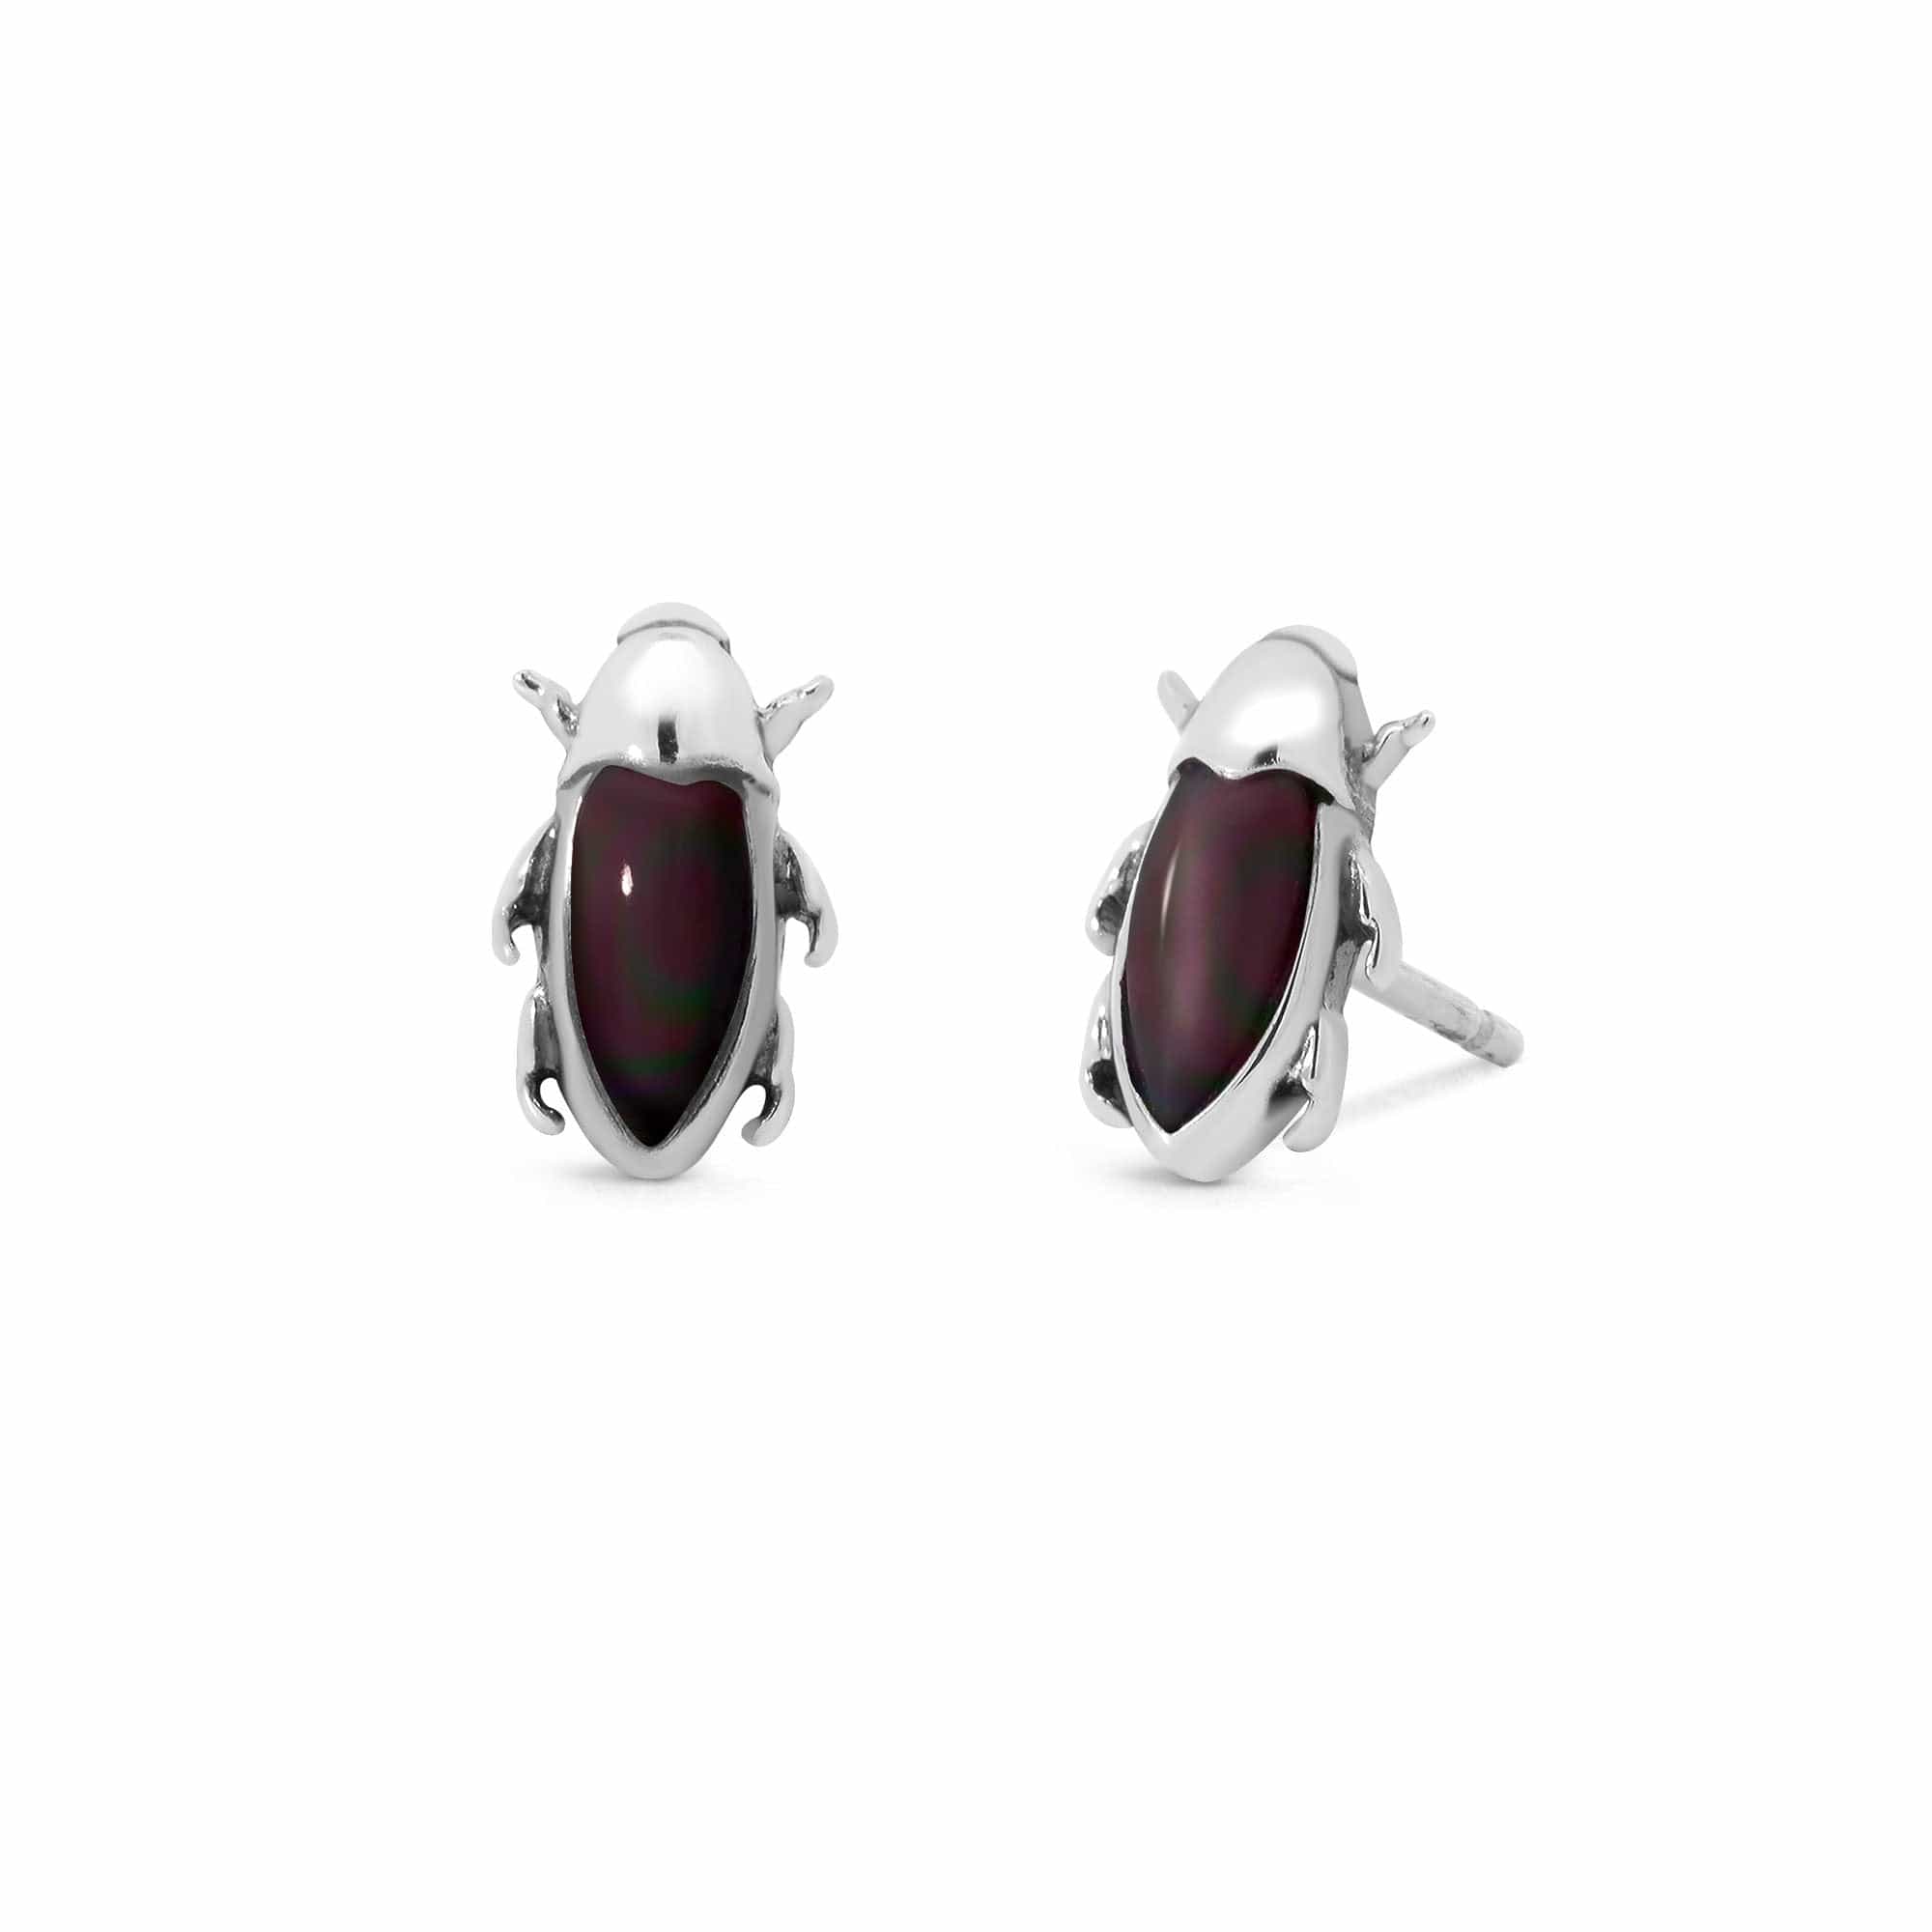 Boma Jewelry Earrings Black Mother of Pearl Bug Stud Earrings with Stone